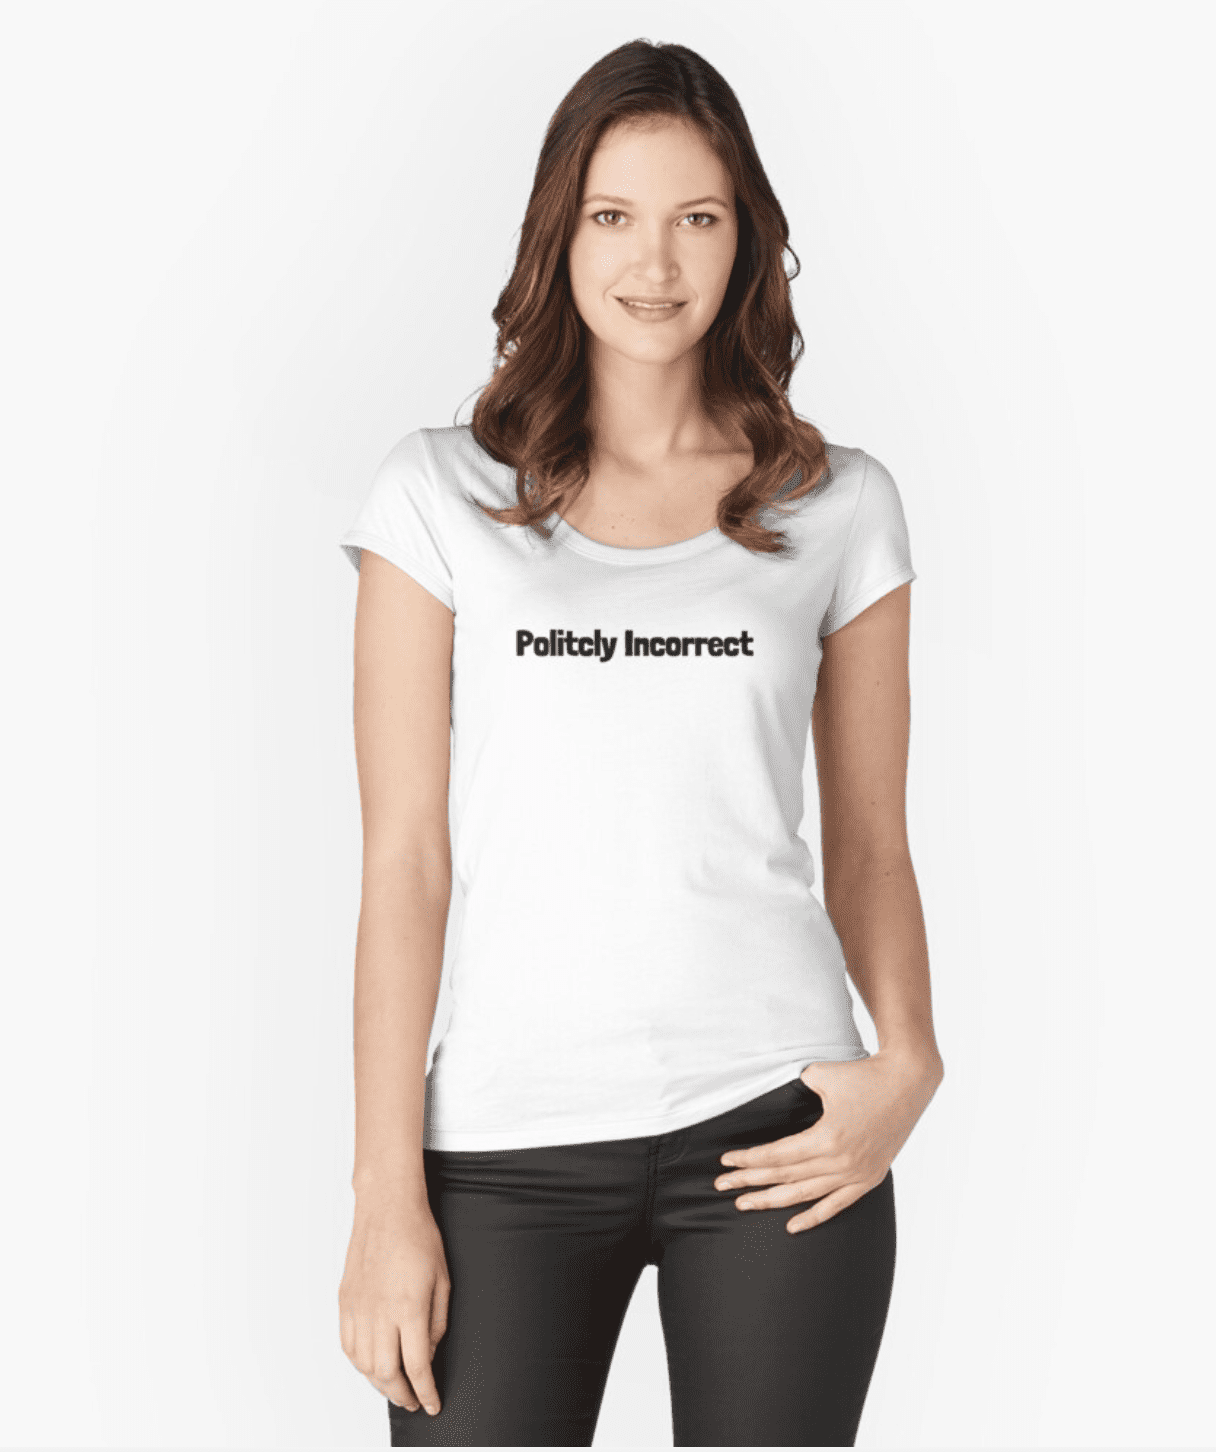 Politcly Incorrect solid color t shirts are 100 cotton